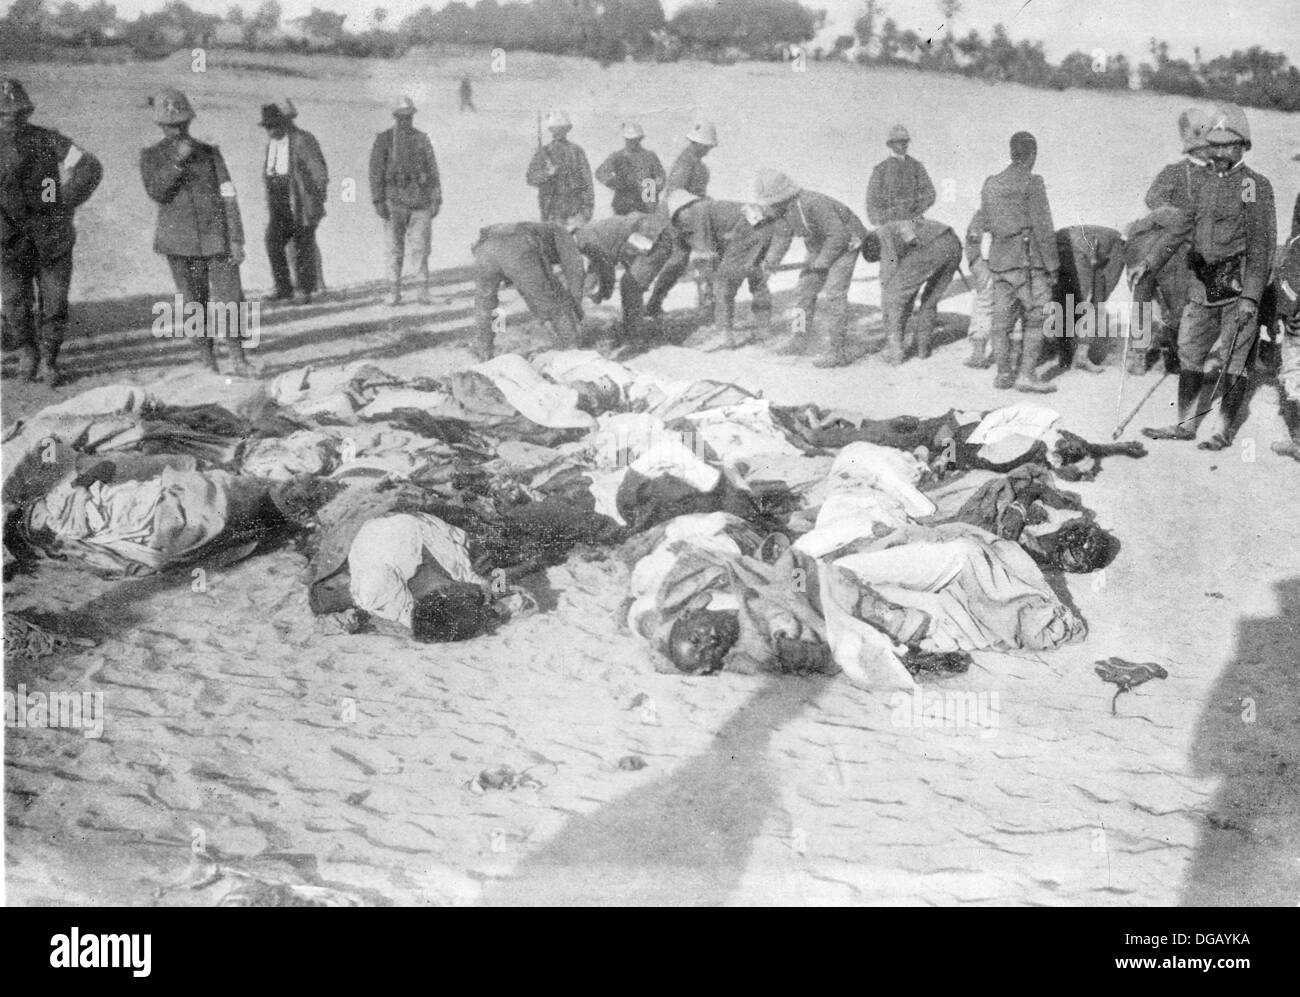 Execution of 30 Turks dressed as Arabs in Tripoli. Italian soldiers and dead bodies of Turkish men during the Turco-Italian War Stock Photo